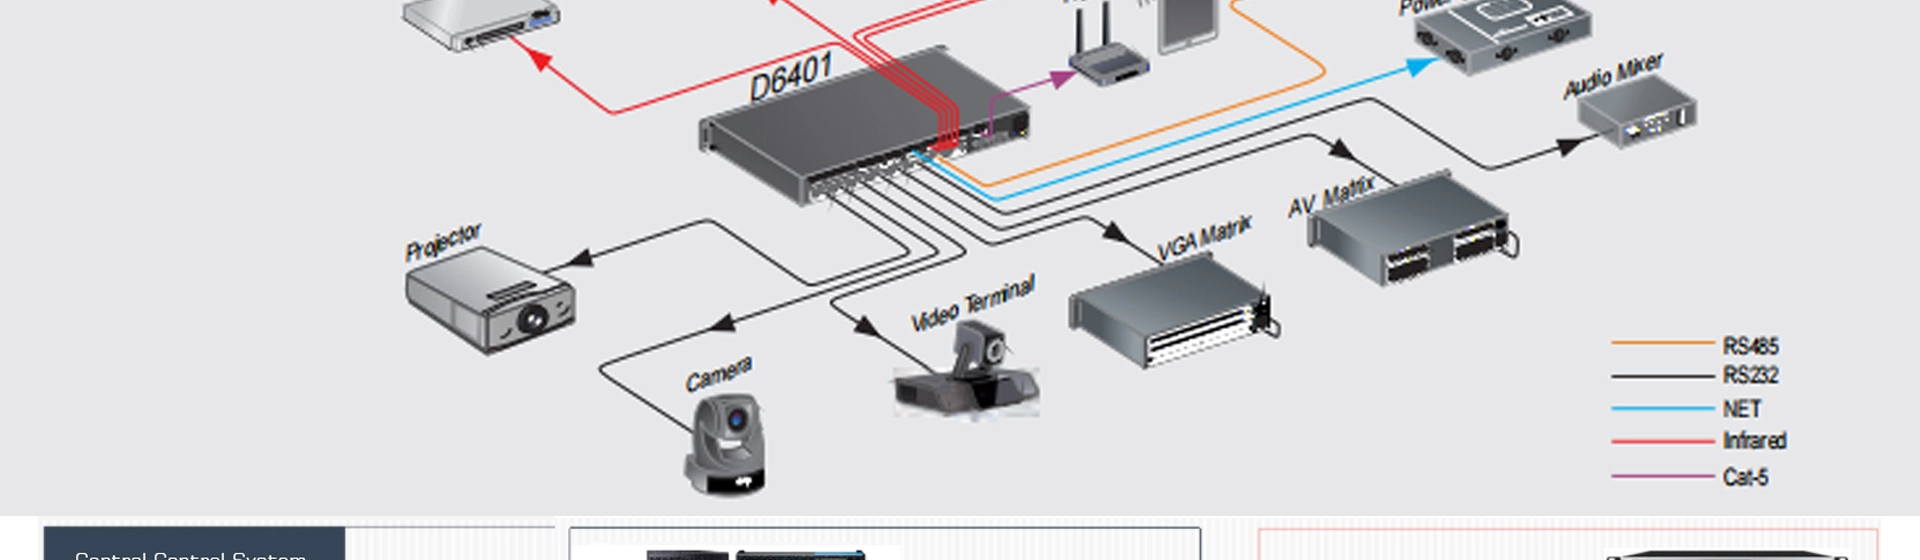 Integrated Multimedia Central Control Host